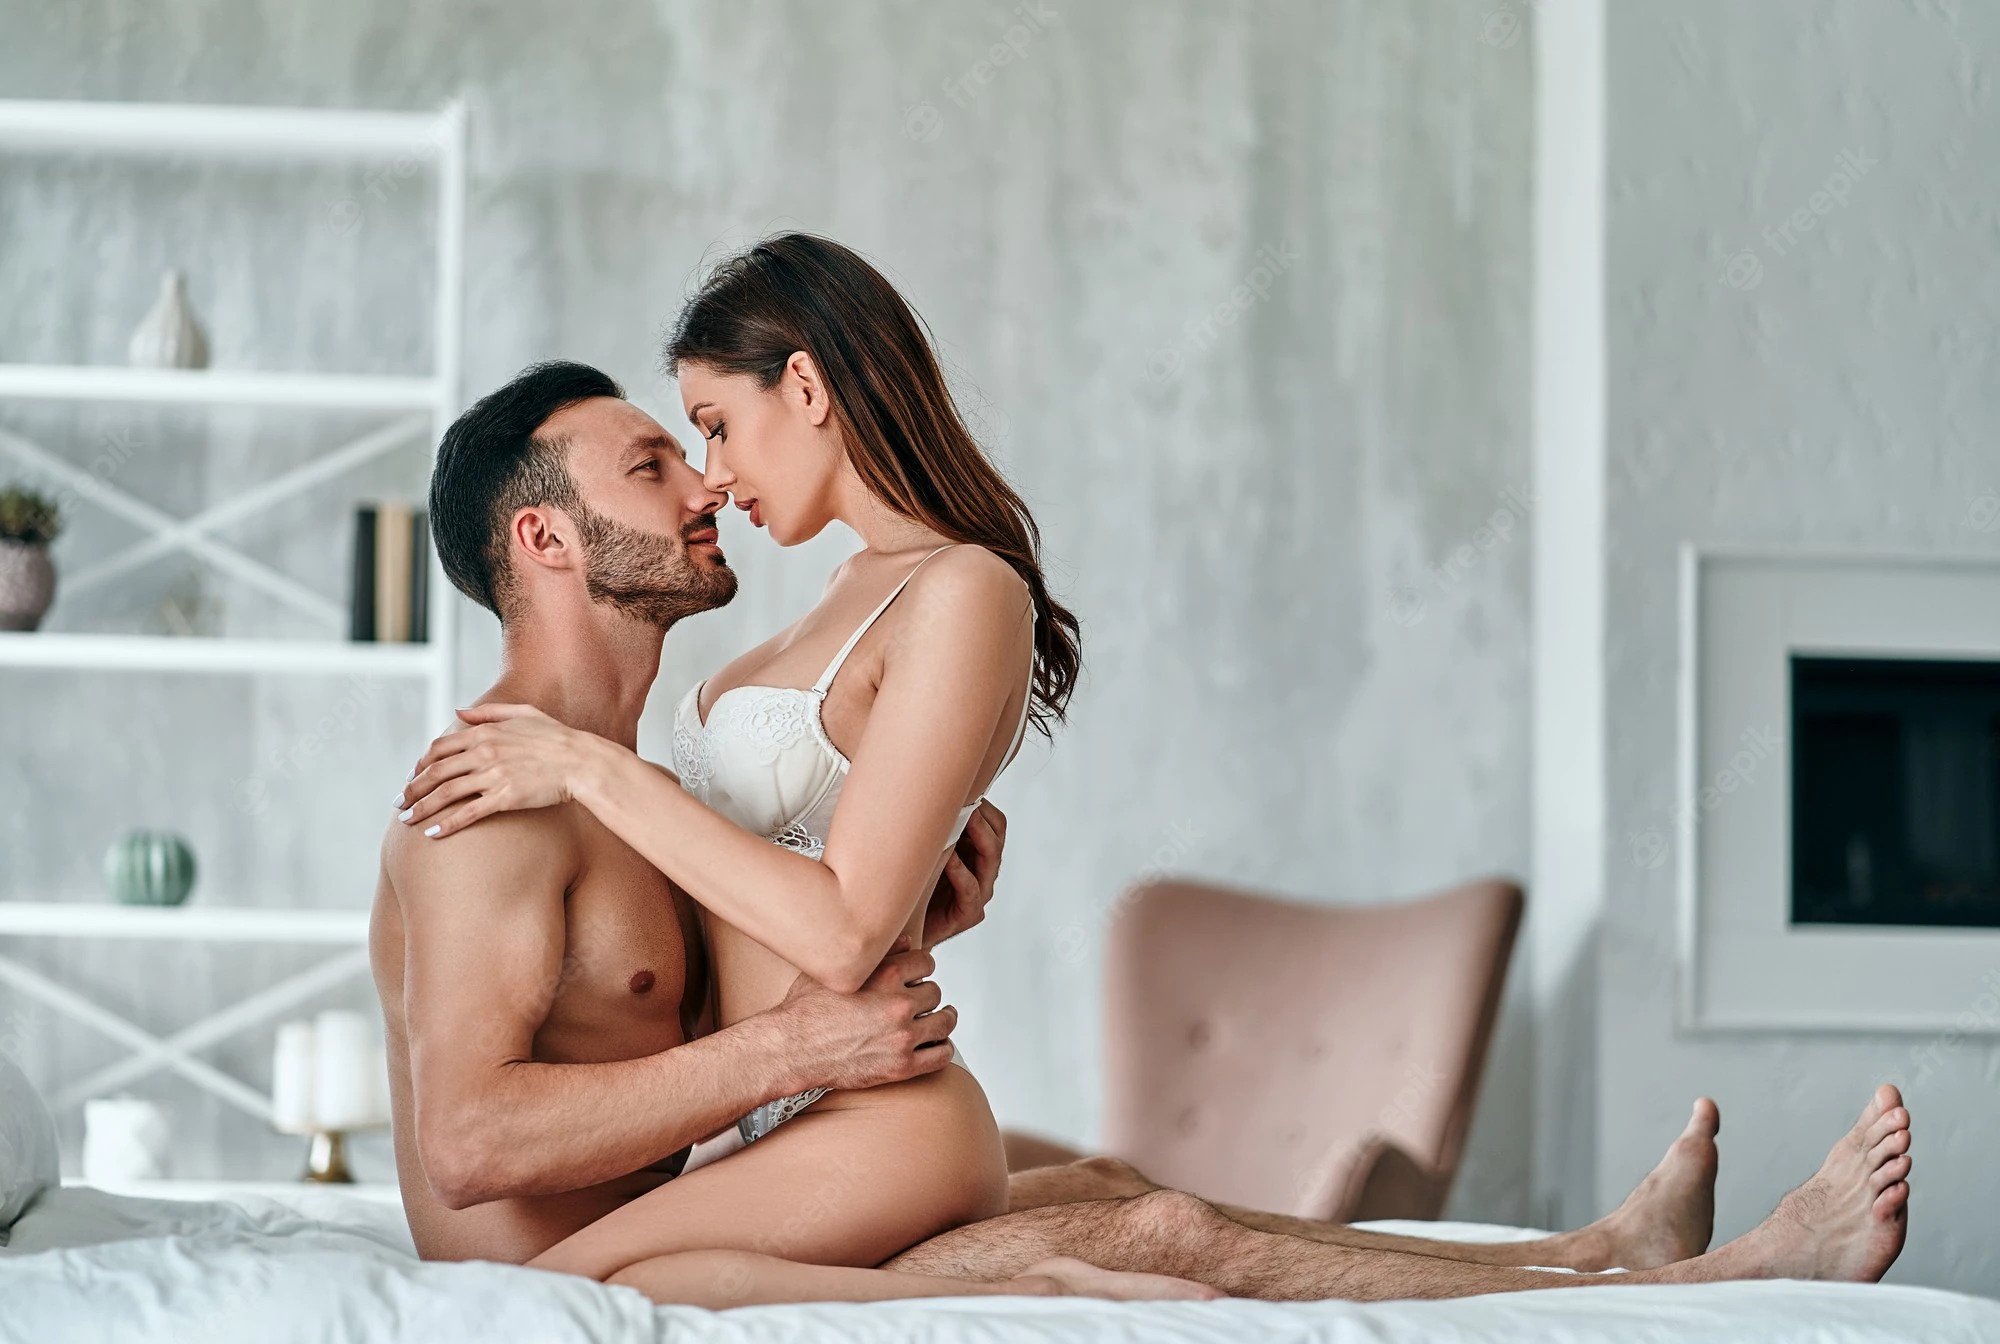 Romcesex - Top 2 Best Sites To Watch Romantic Porn Videos 2022